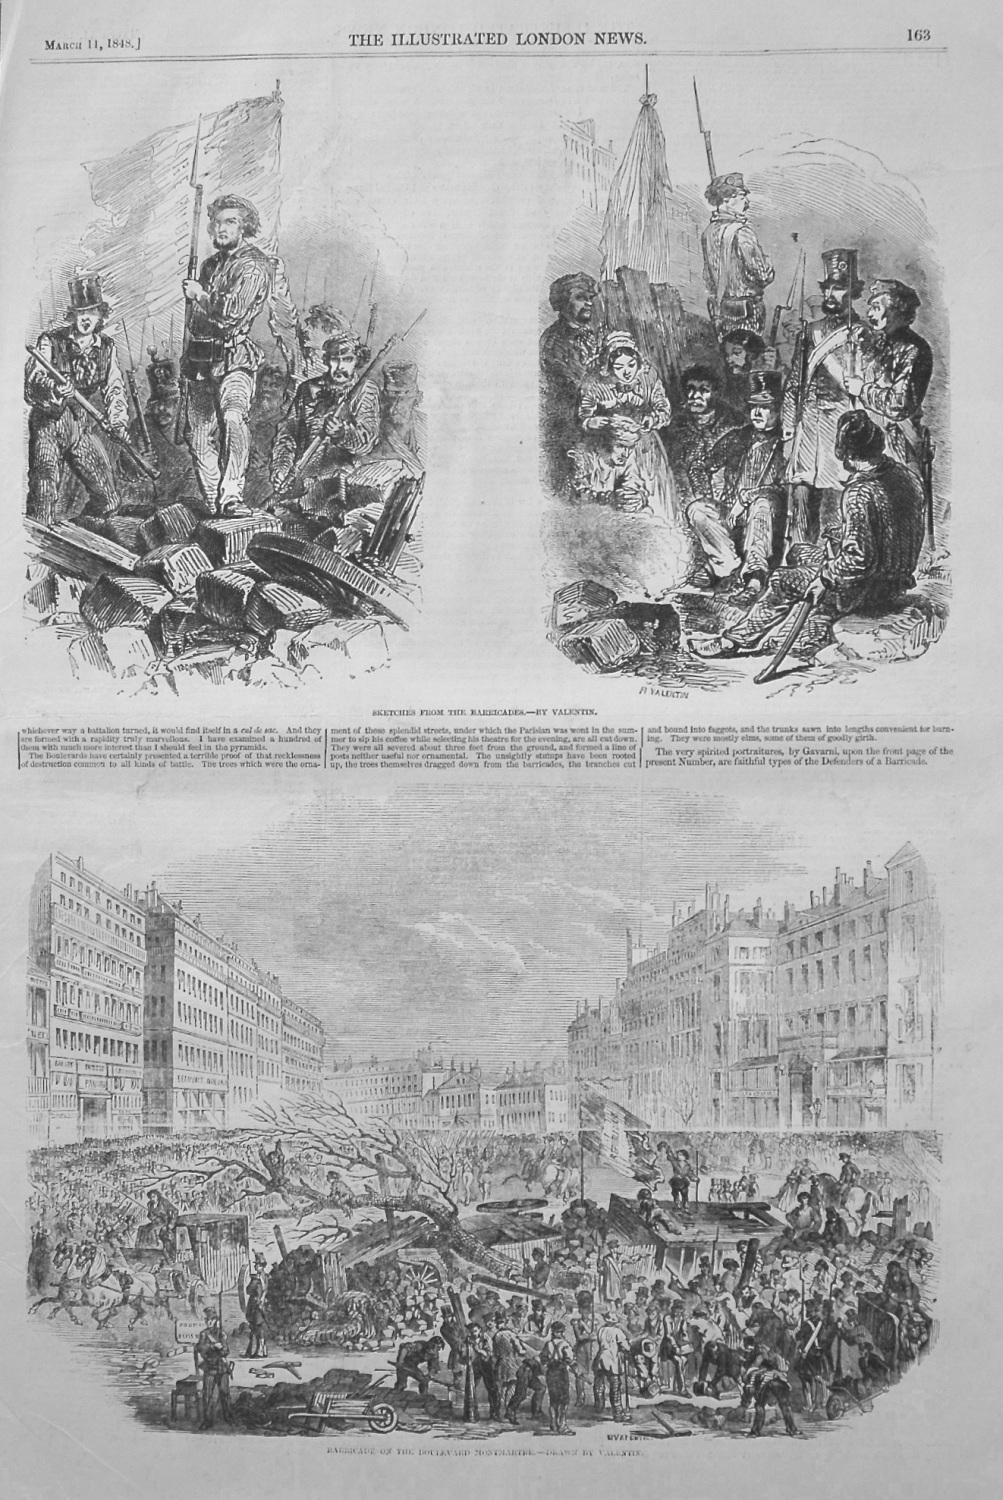 Barricade on the Boulevard Montmartre.- Drawn by Valentin. 1848